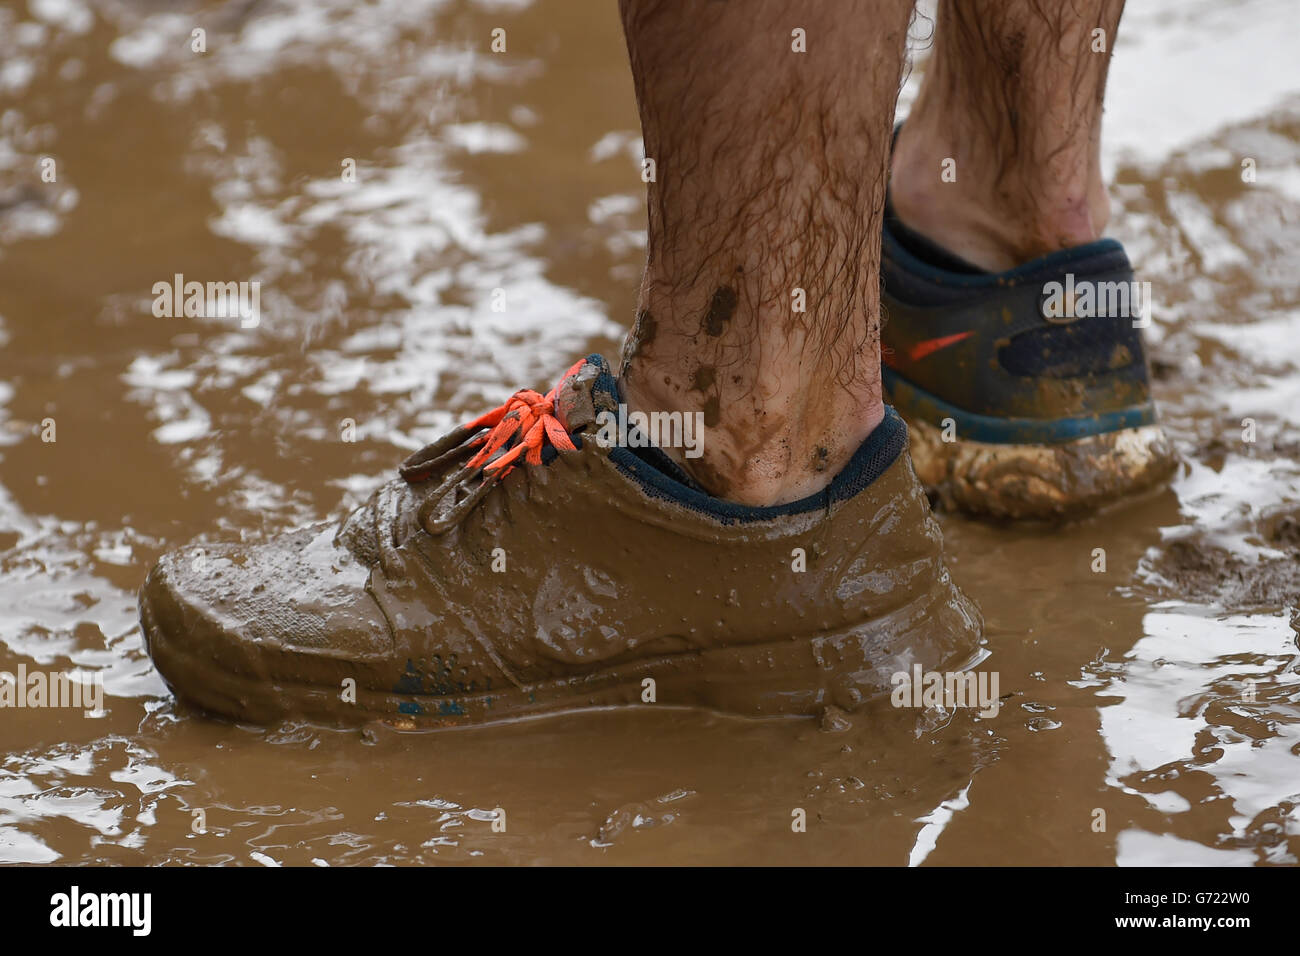 Competitors take part in Rat Race Dirty Weekend at Burghley House in Lincolnshire. PRESS ASSOCIATION Photo. Rat Race Dirty Weekend is the world's longest assault covering 20 miles and 200 obstacles. Picture date: Saturday May 10, 2014. See PA story SOCIAL Rat Race. Photo credit should read: Joe Giddens/PA Wire Stock Photo